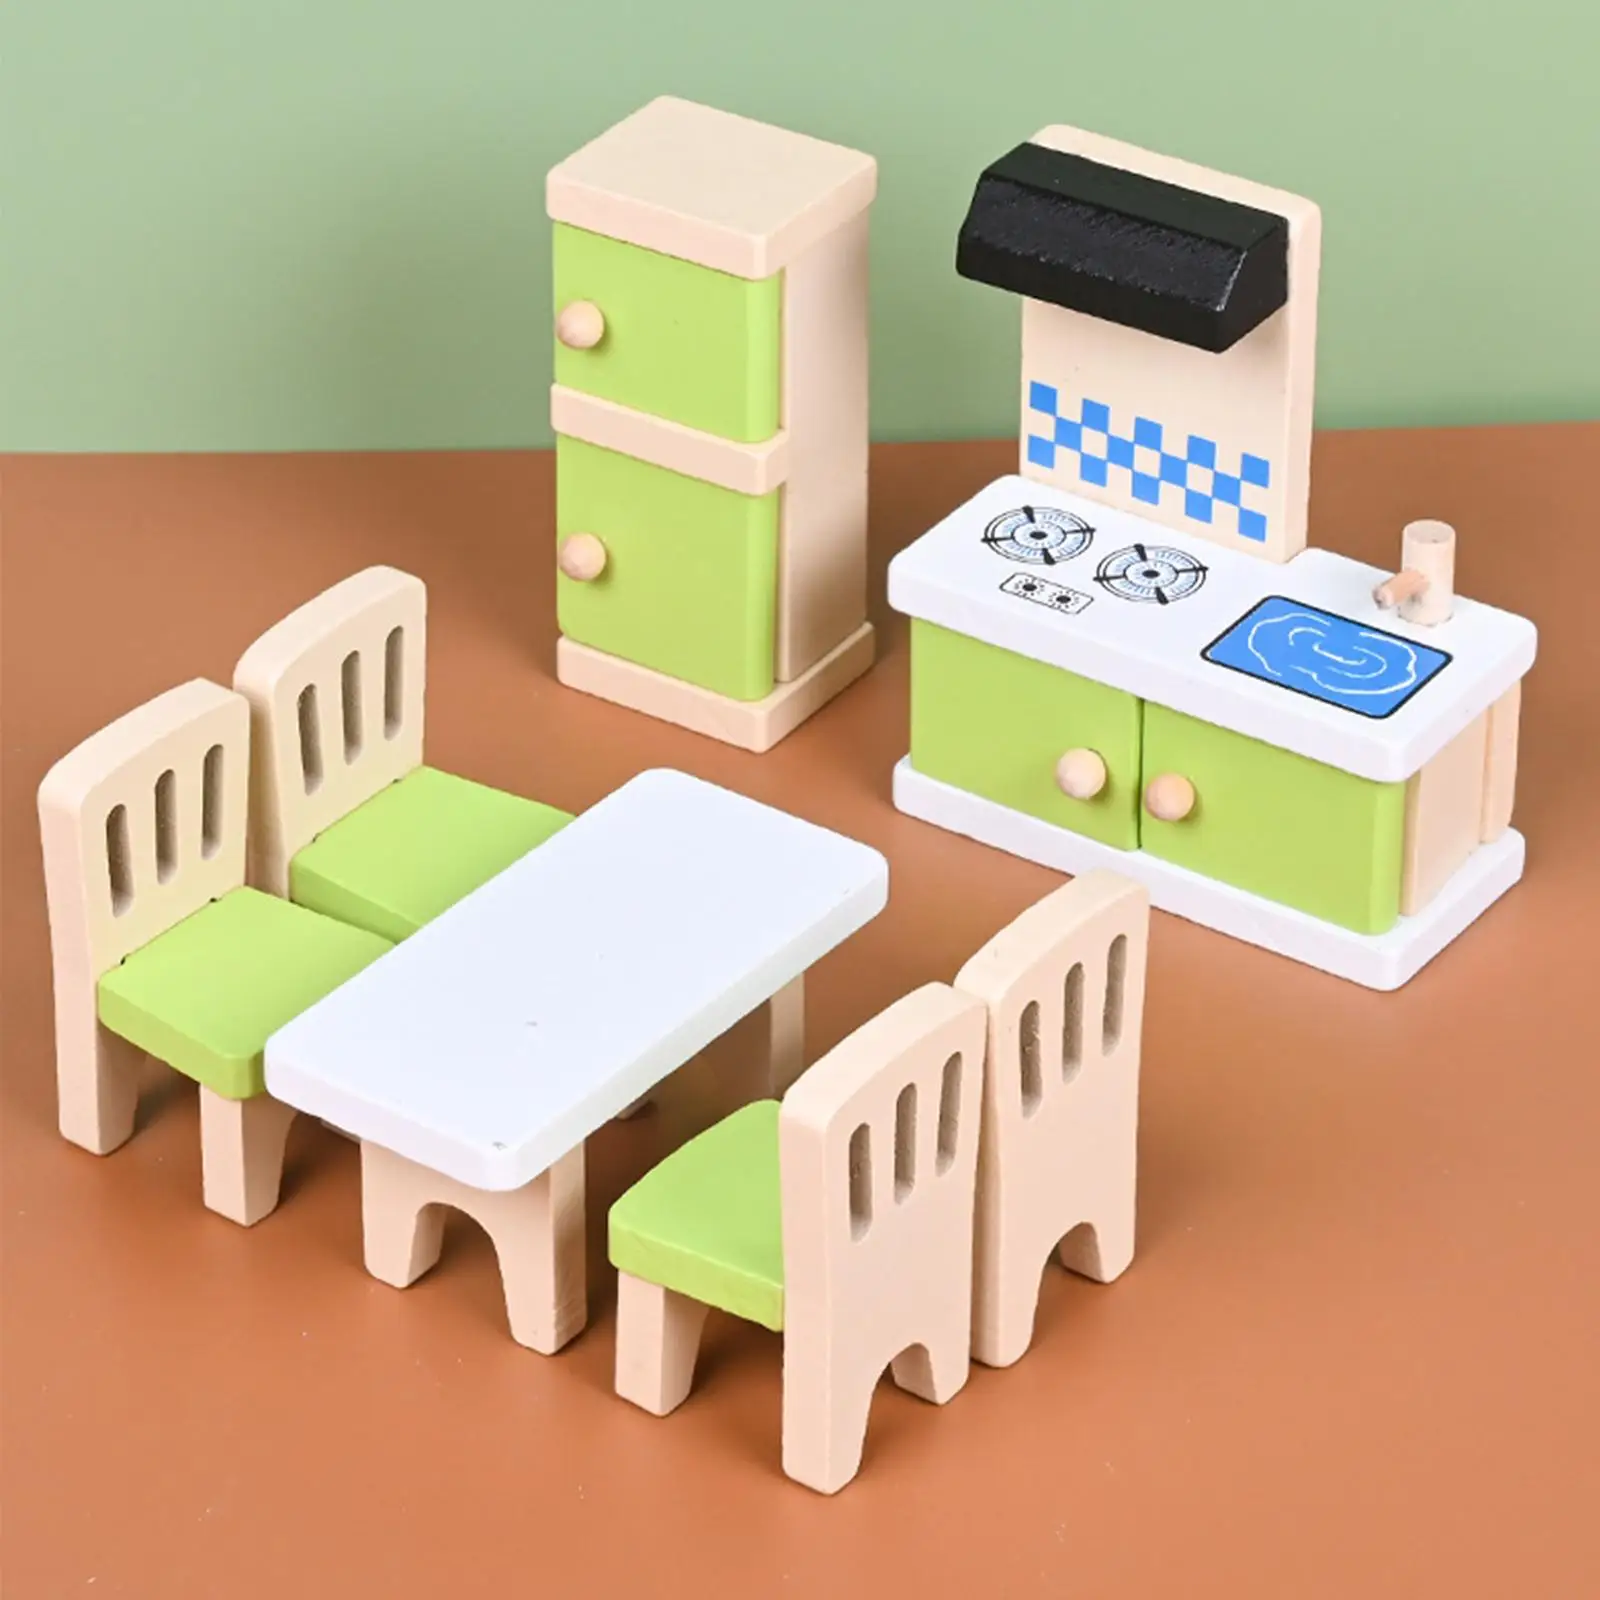 Simulation Miniature Wooden Furniture Toys Doll House Accessories Dollhouse Furniture Set Dollhouse Furniture Playset for Decor